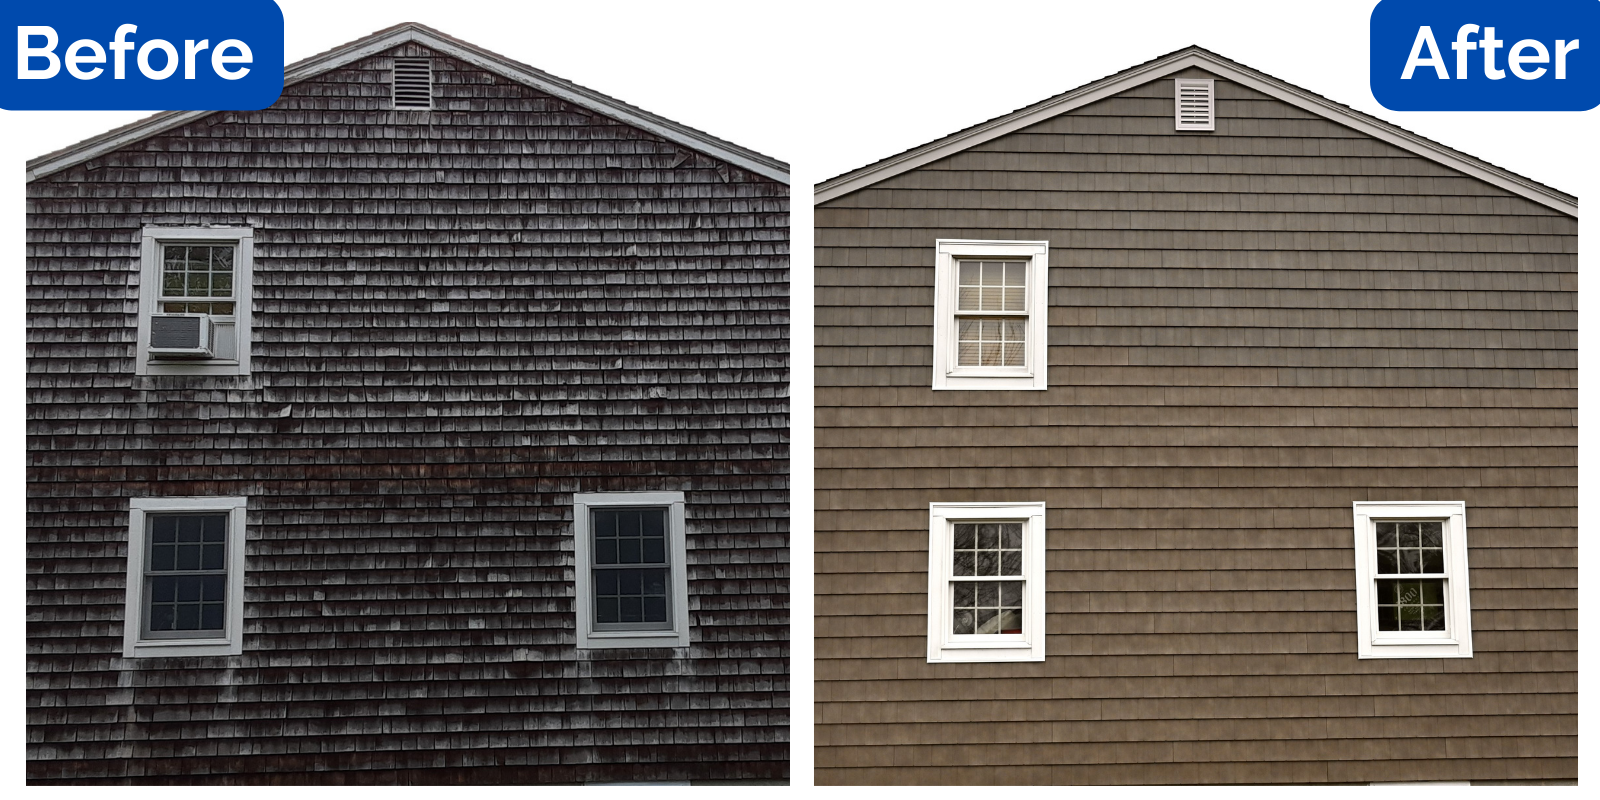 ways to make your home more eco-friendly with Hardie siding